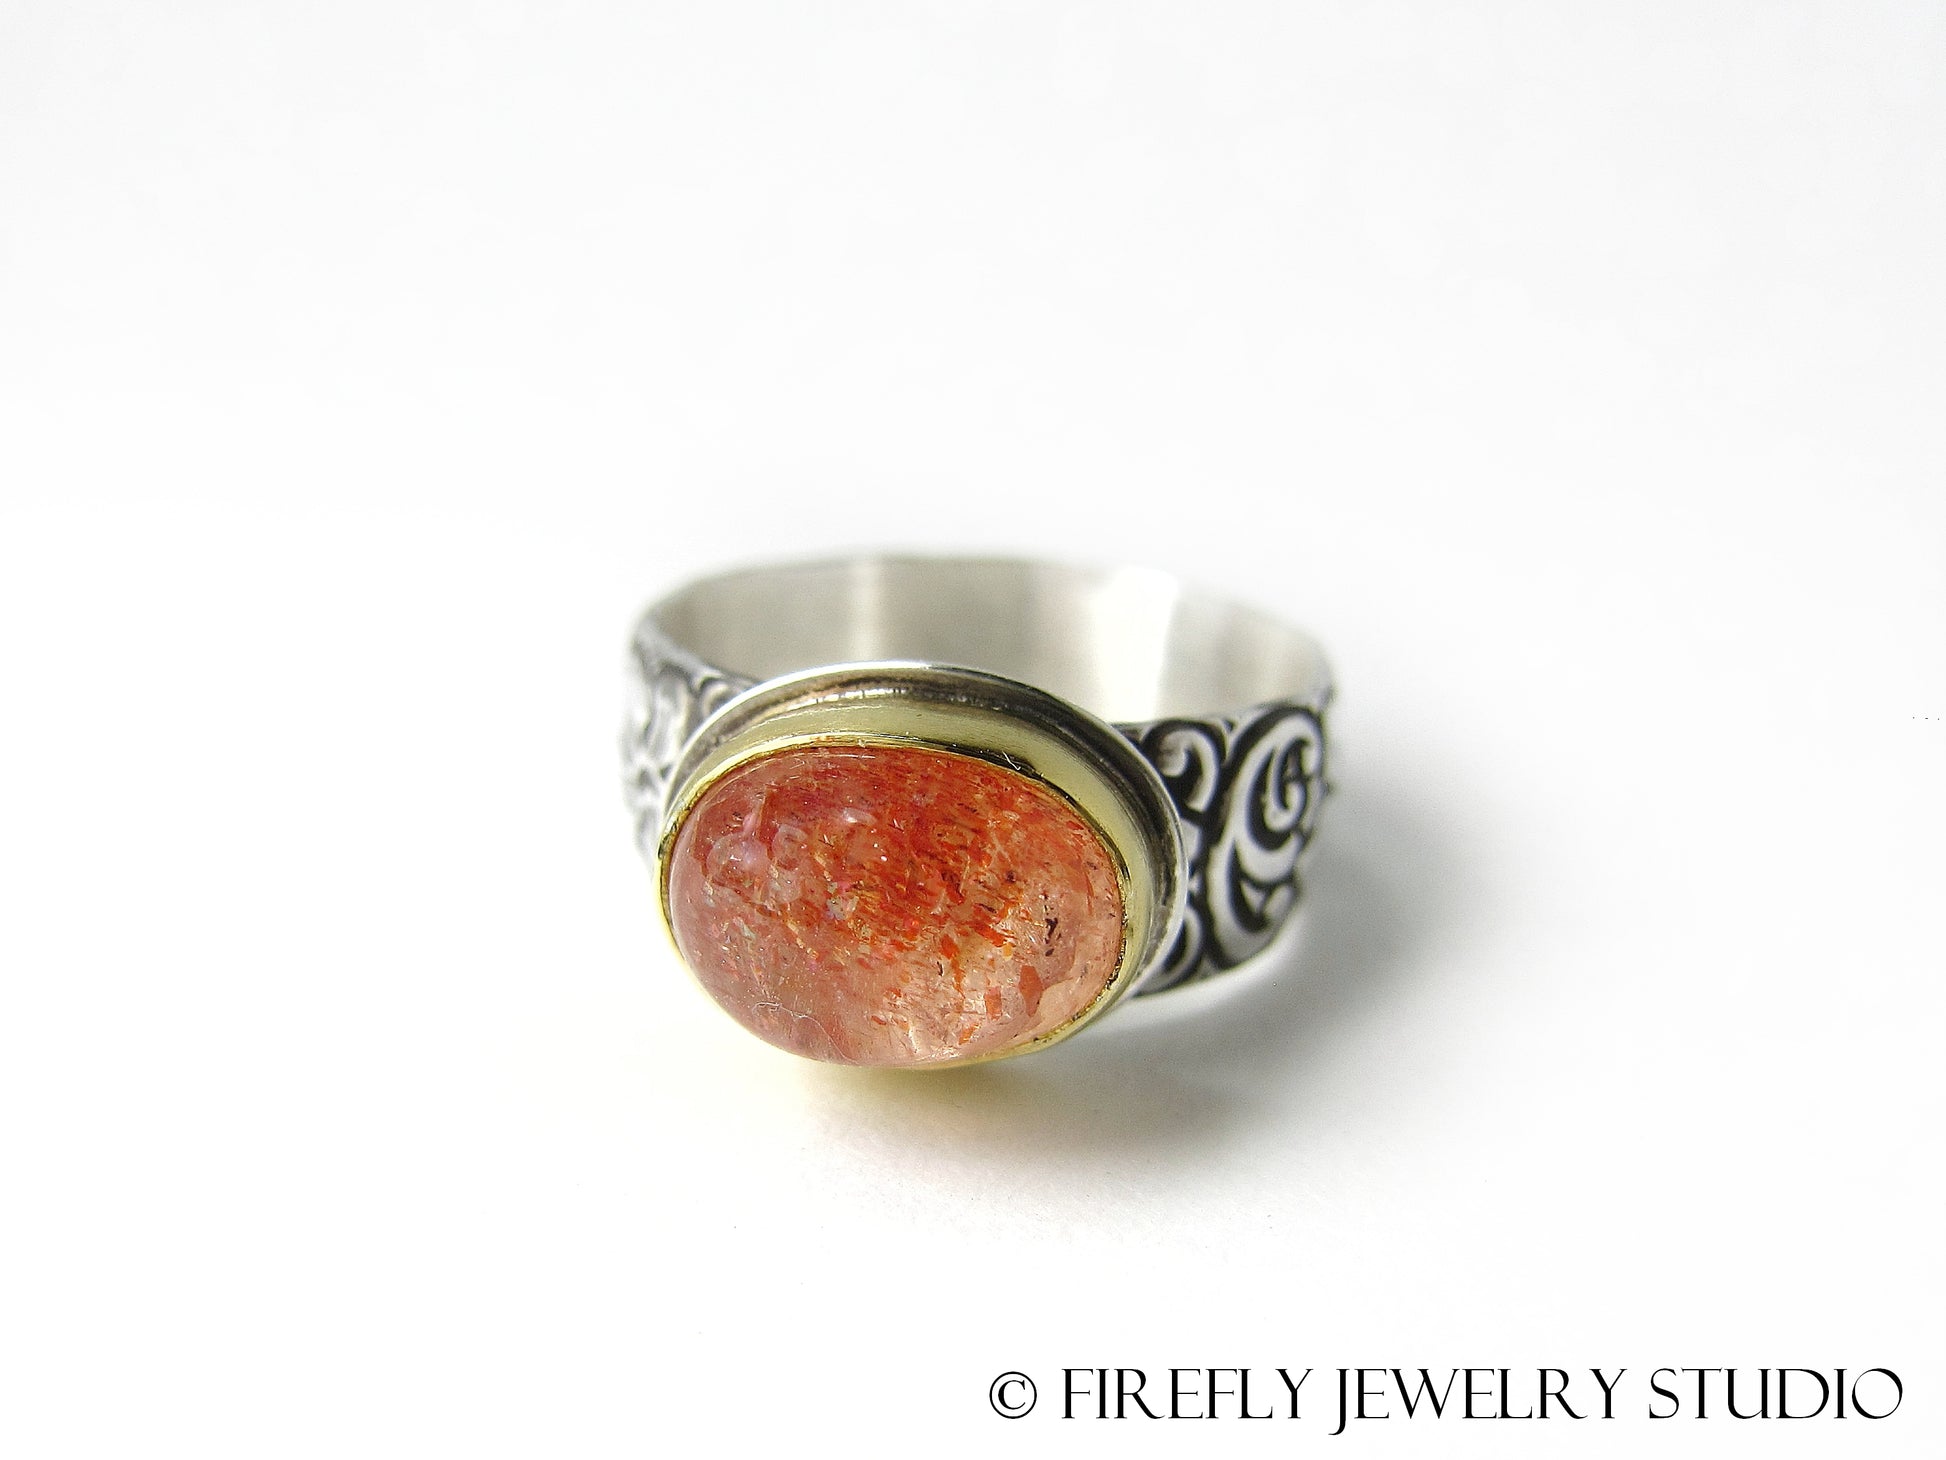 Confetti Sunstone Ring in 24k Gold and Sterling Silver. Size 6.75 - Firefly Jewelry Studio